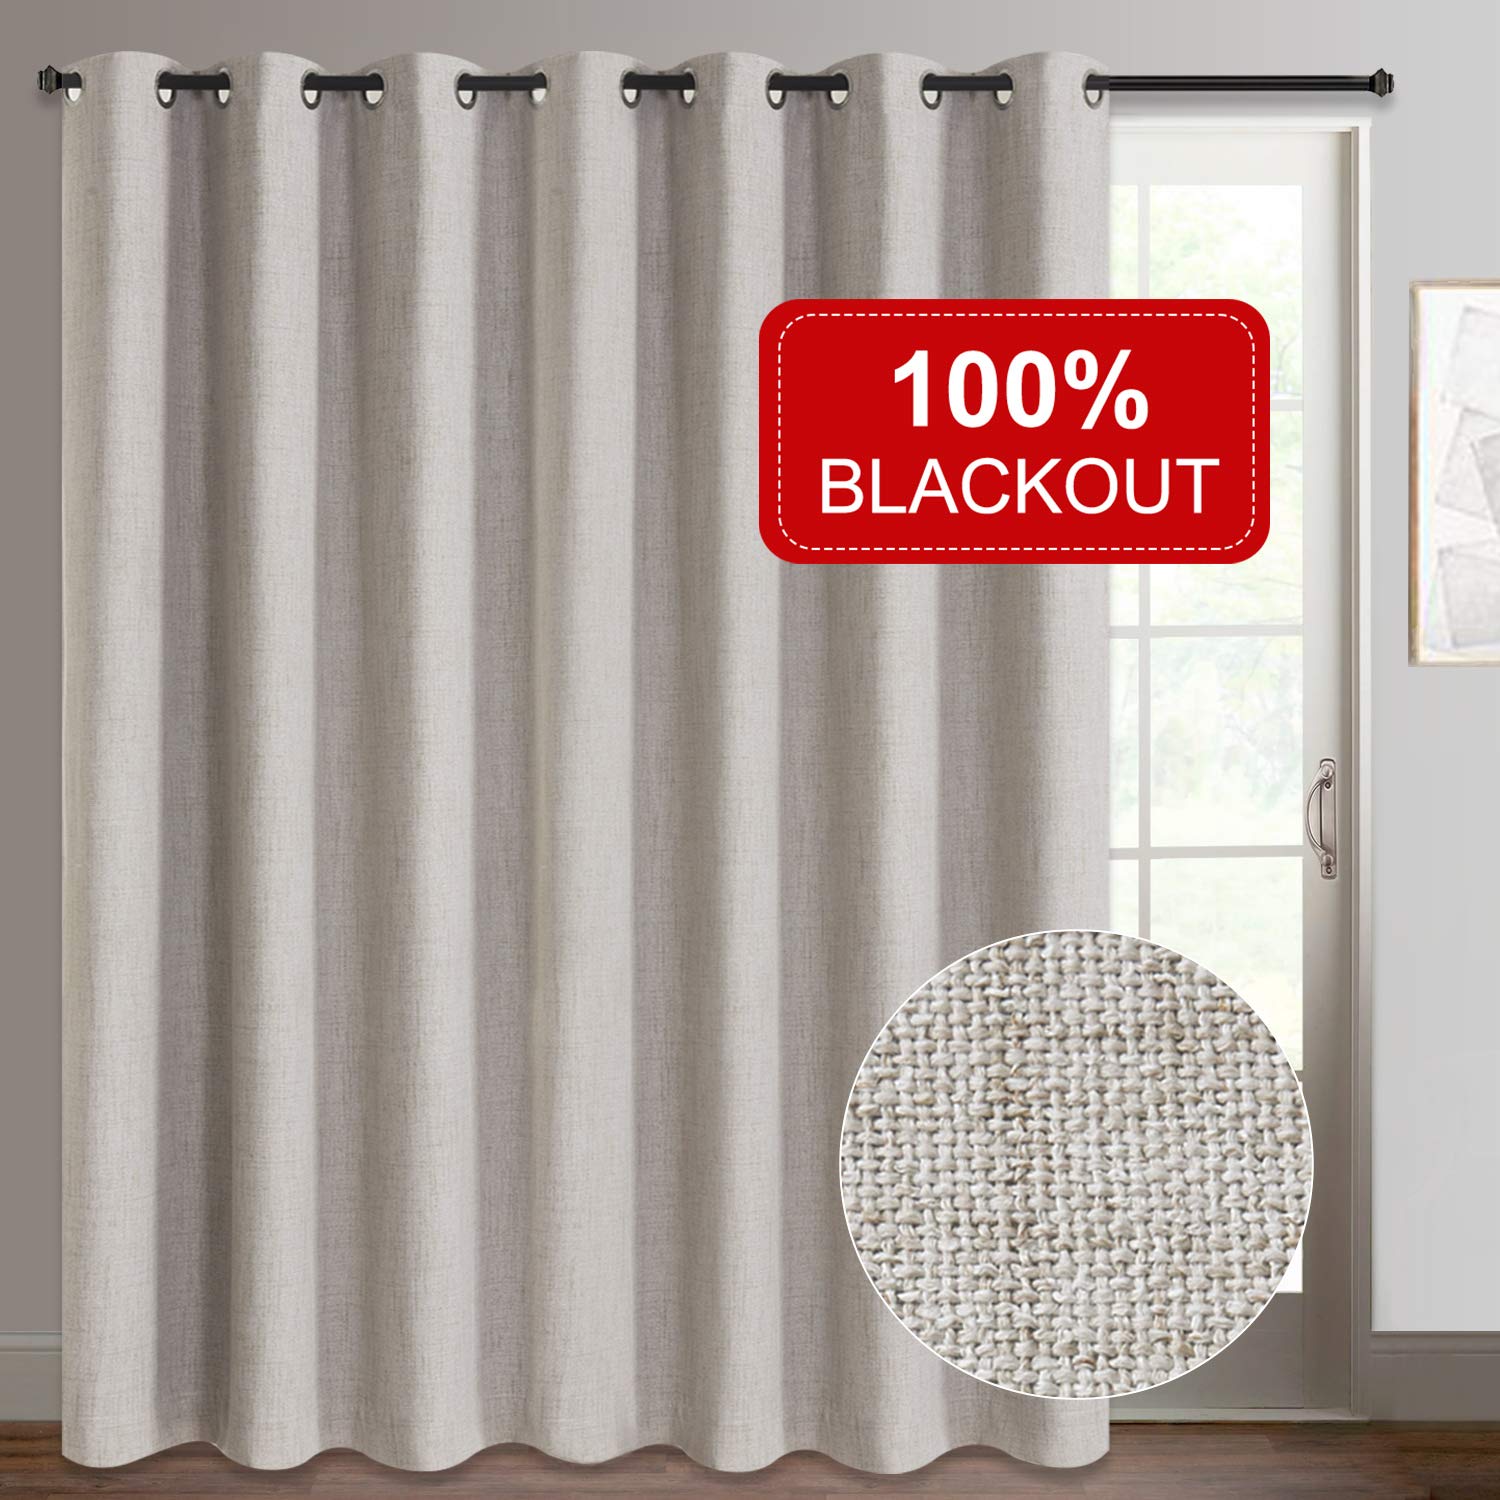 Rose Home Fashion Sliding Door Curtains, Primitive Linen Look 100% Blackout Curtains, Thermal Insulated Patio Door Curtains-1..